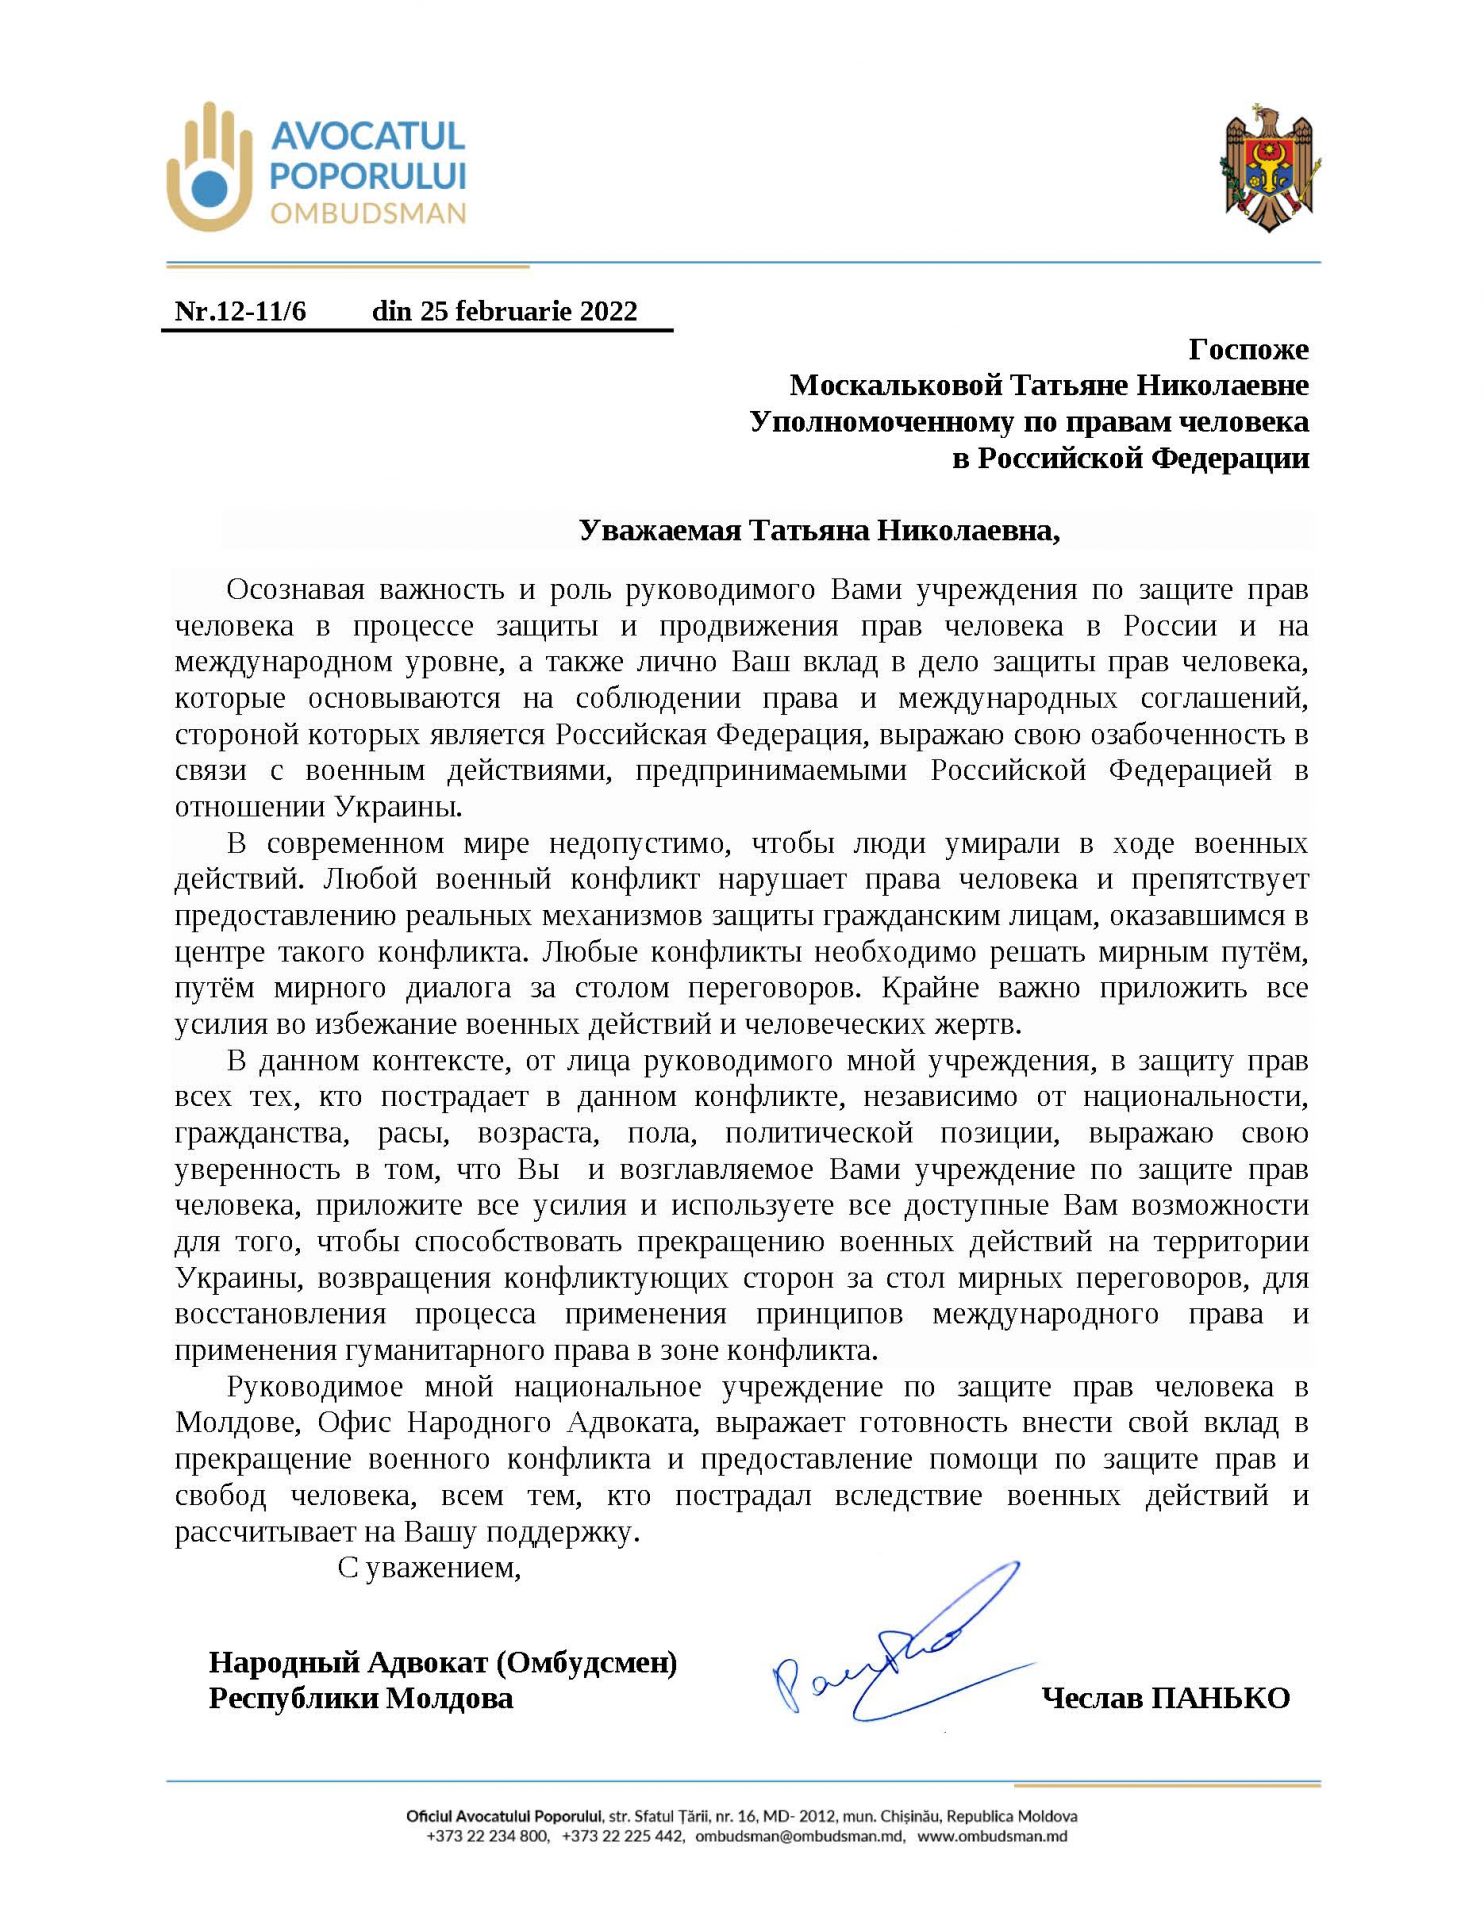 People’s Advocate have sent a Letter to High Commissioner of Human Rights in the Russian Federation